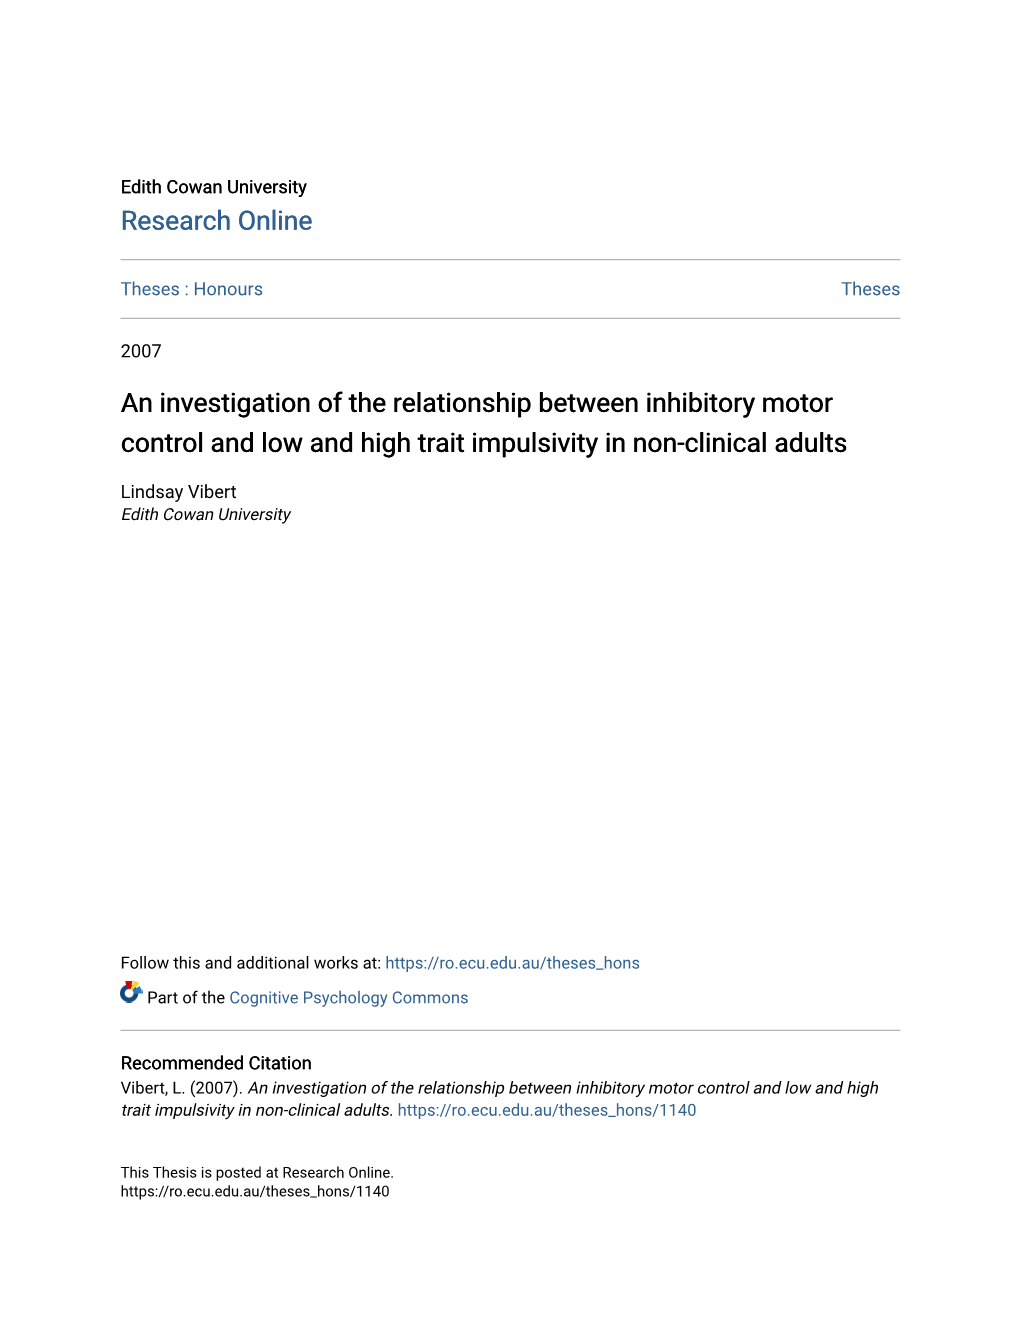 An Investigation of the Relationship Between Inhibitory Motor Control and Low and High Trait Impulsivity in Non-Clinical Adults